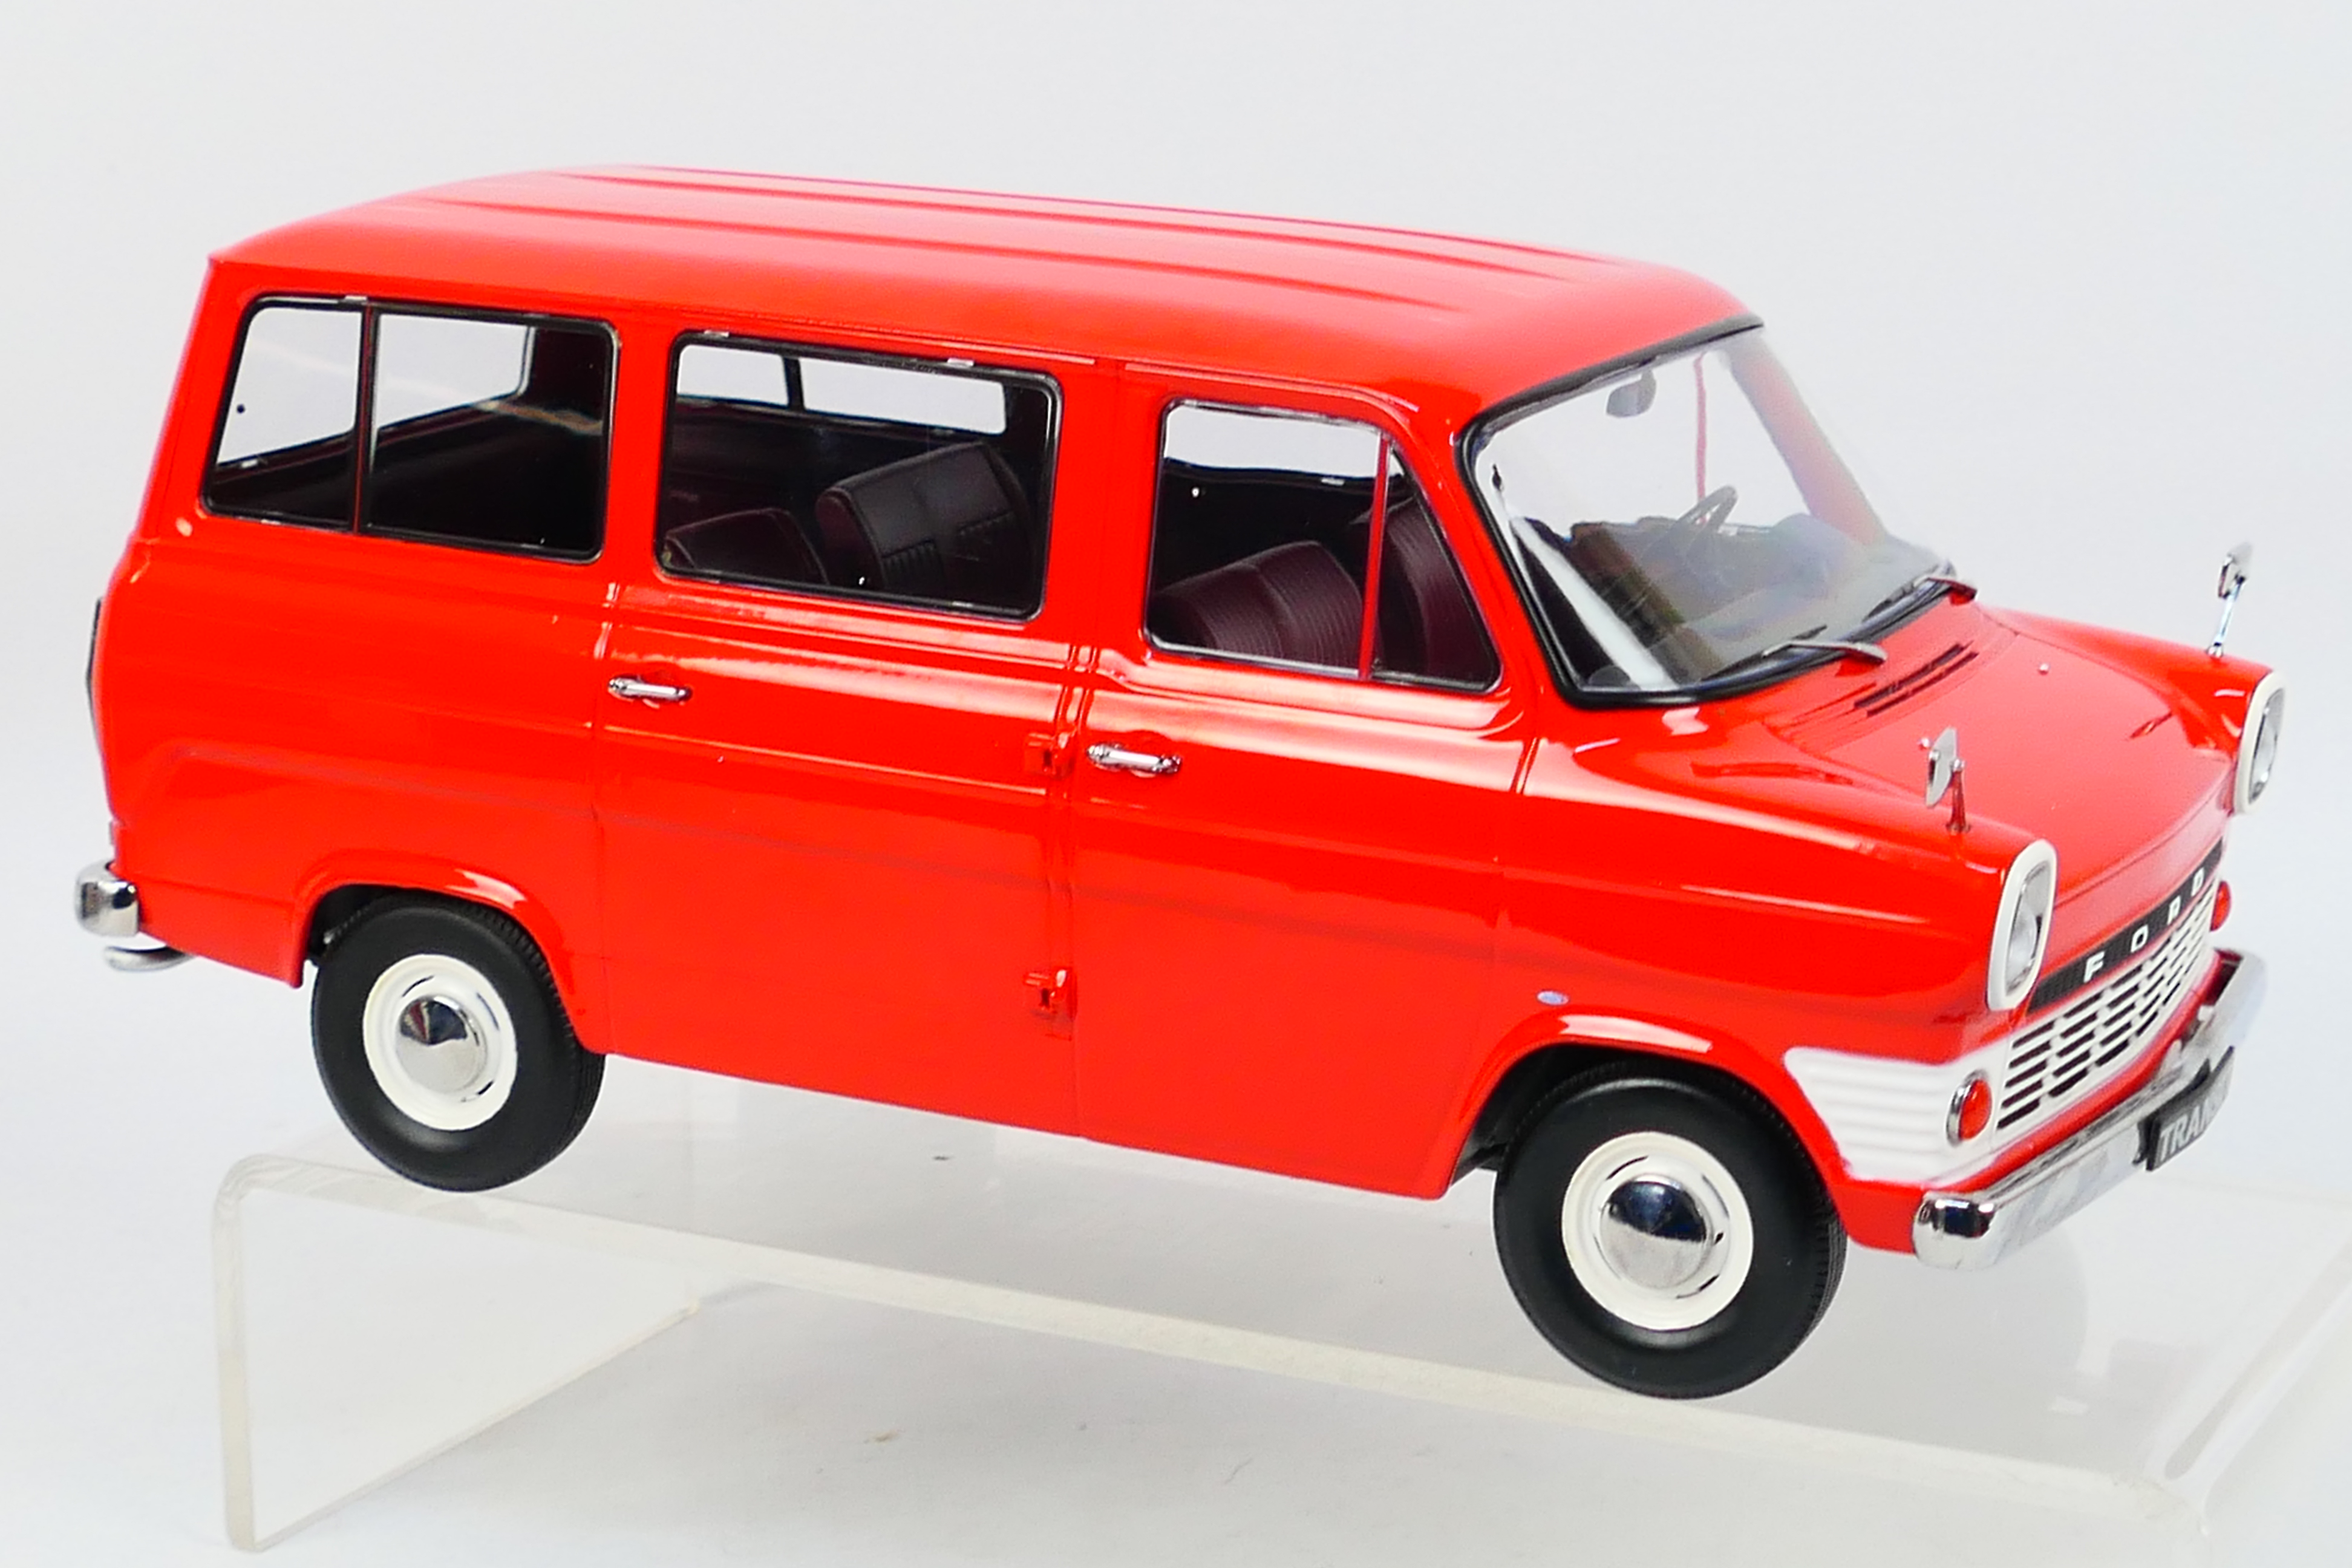 KK scale - A boxed Limited Edition 1:18 scale KK SCale #KKDC180463 1965 Ford Transit Bus. - Image 4 of 5